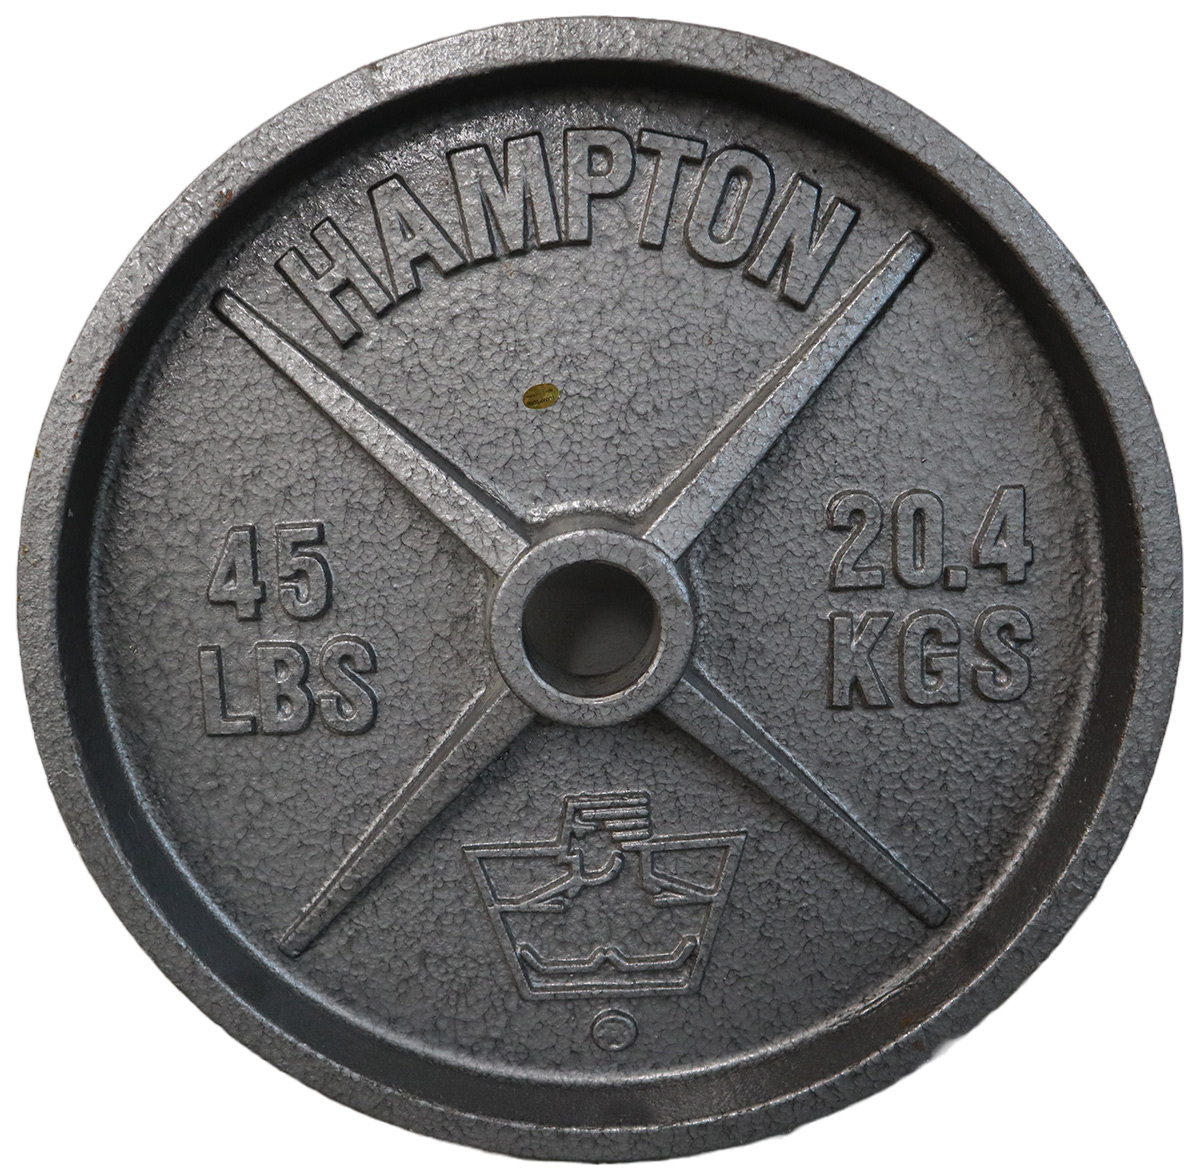 Used Hampton 45LB Olympic Plate Weight Freeweights & Accessories